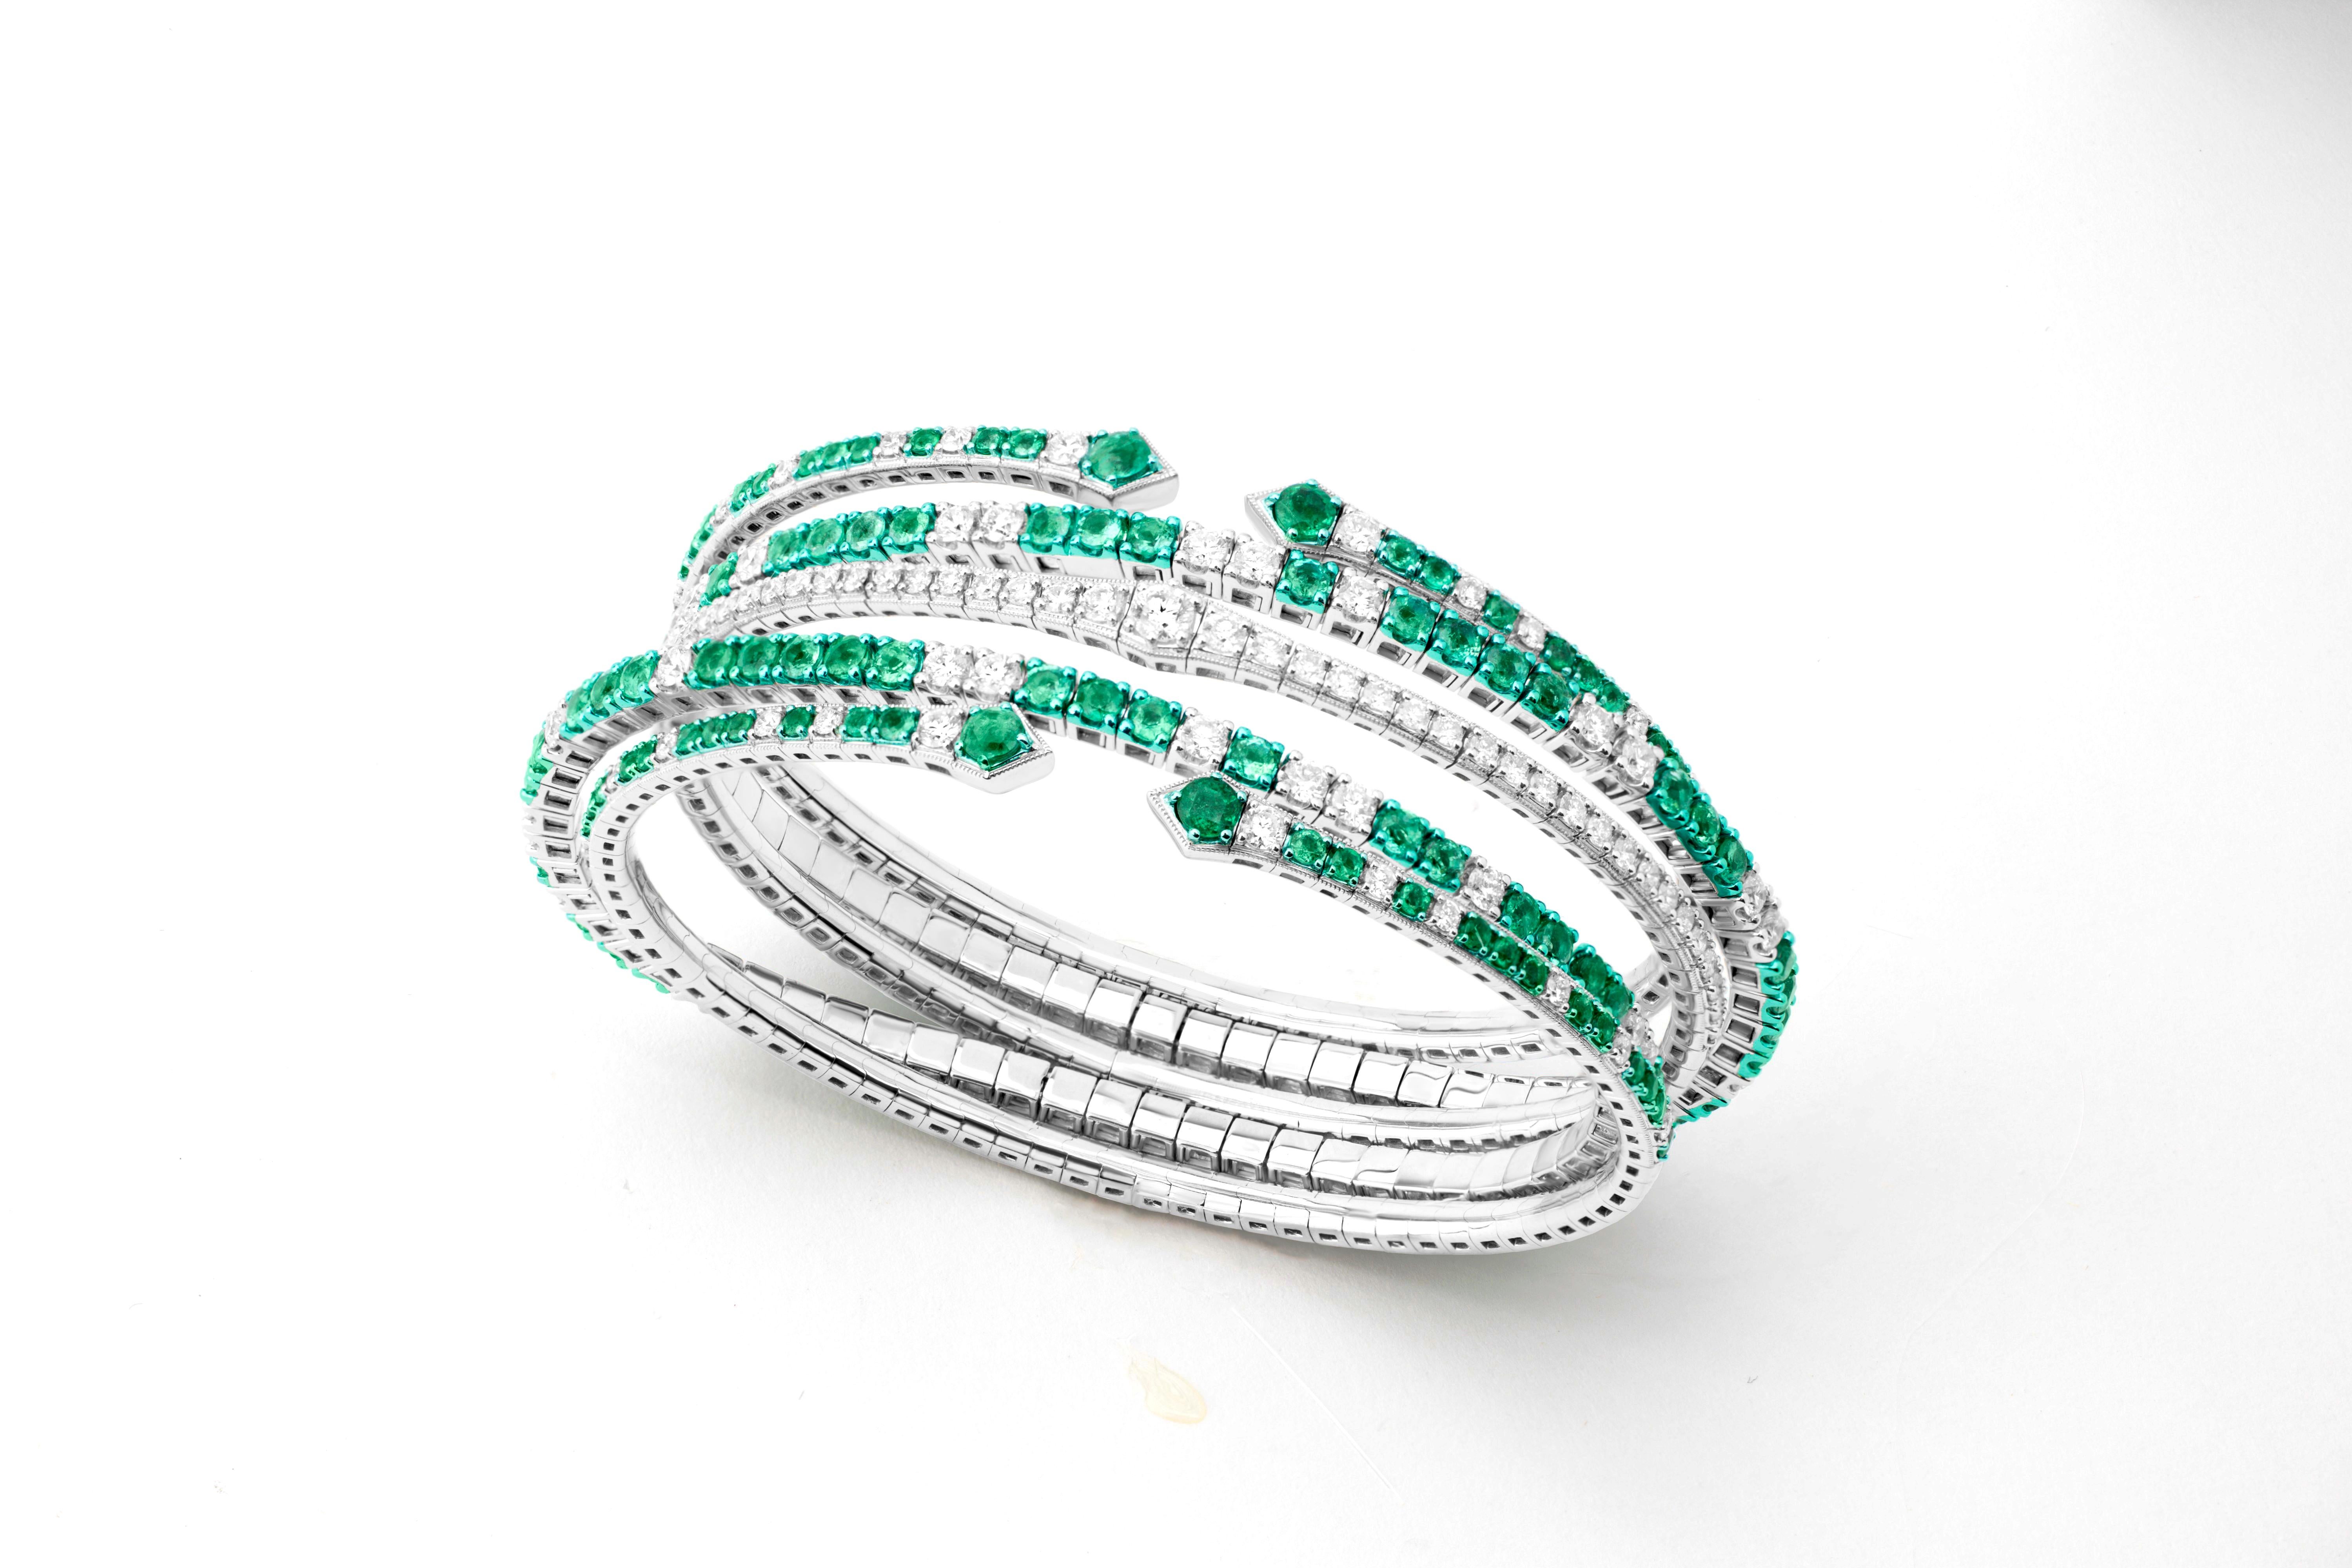 Introducing the Luxle 1.39 Cttw. Emerald and Diamond Serpentine Cuff Bracelet, a true masterpiece in jewelry craftsmanship that embodies elegance, luxury, and artistry. Crafted from 18k white gold with a captivating green rhodium finish, this